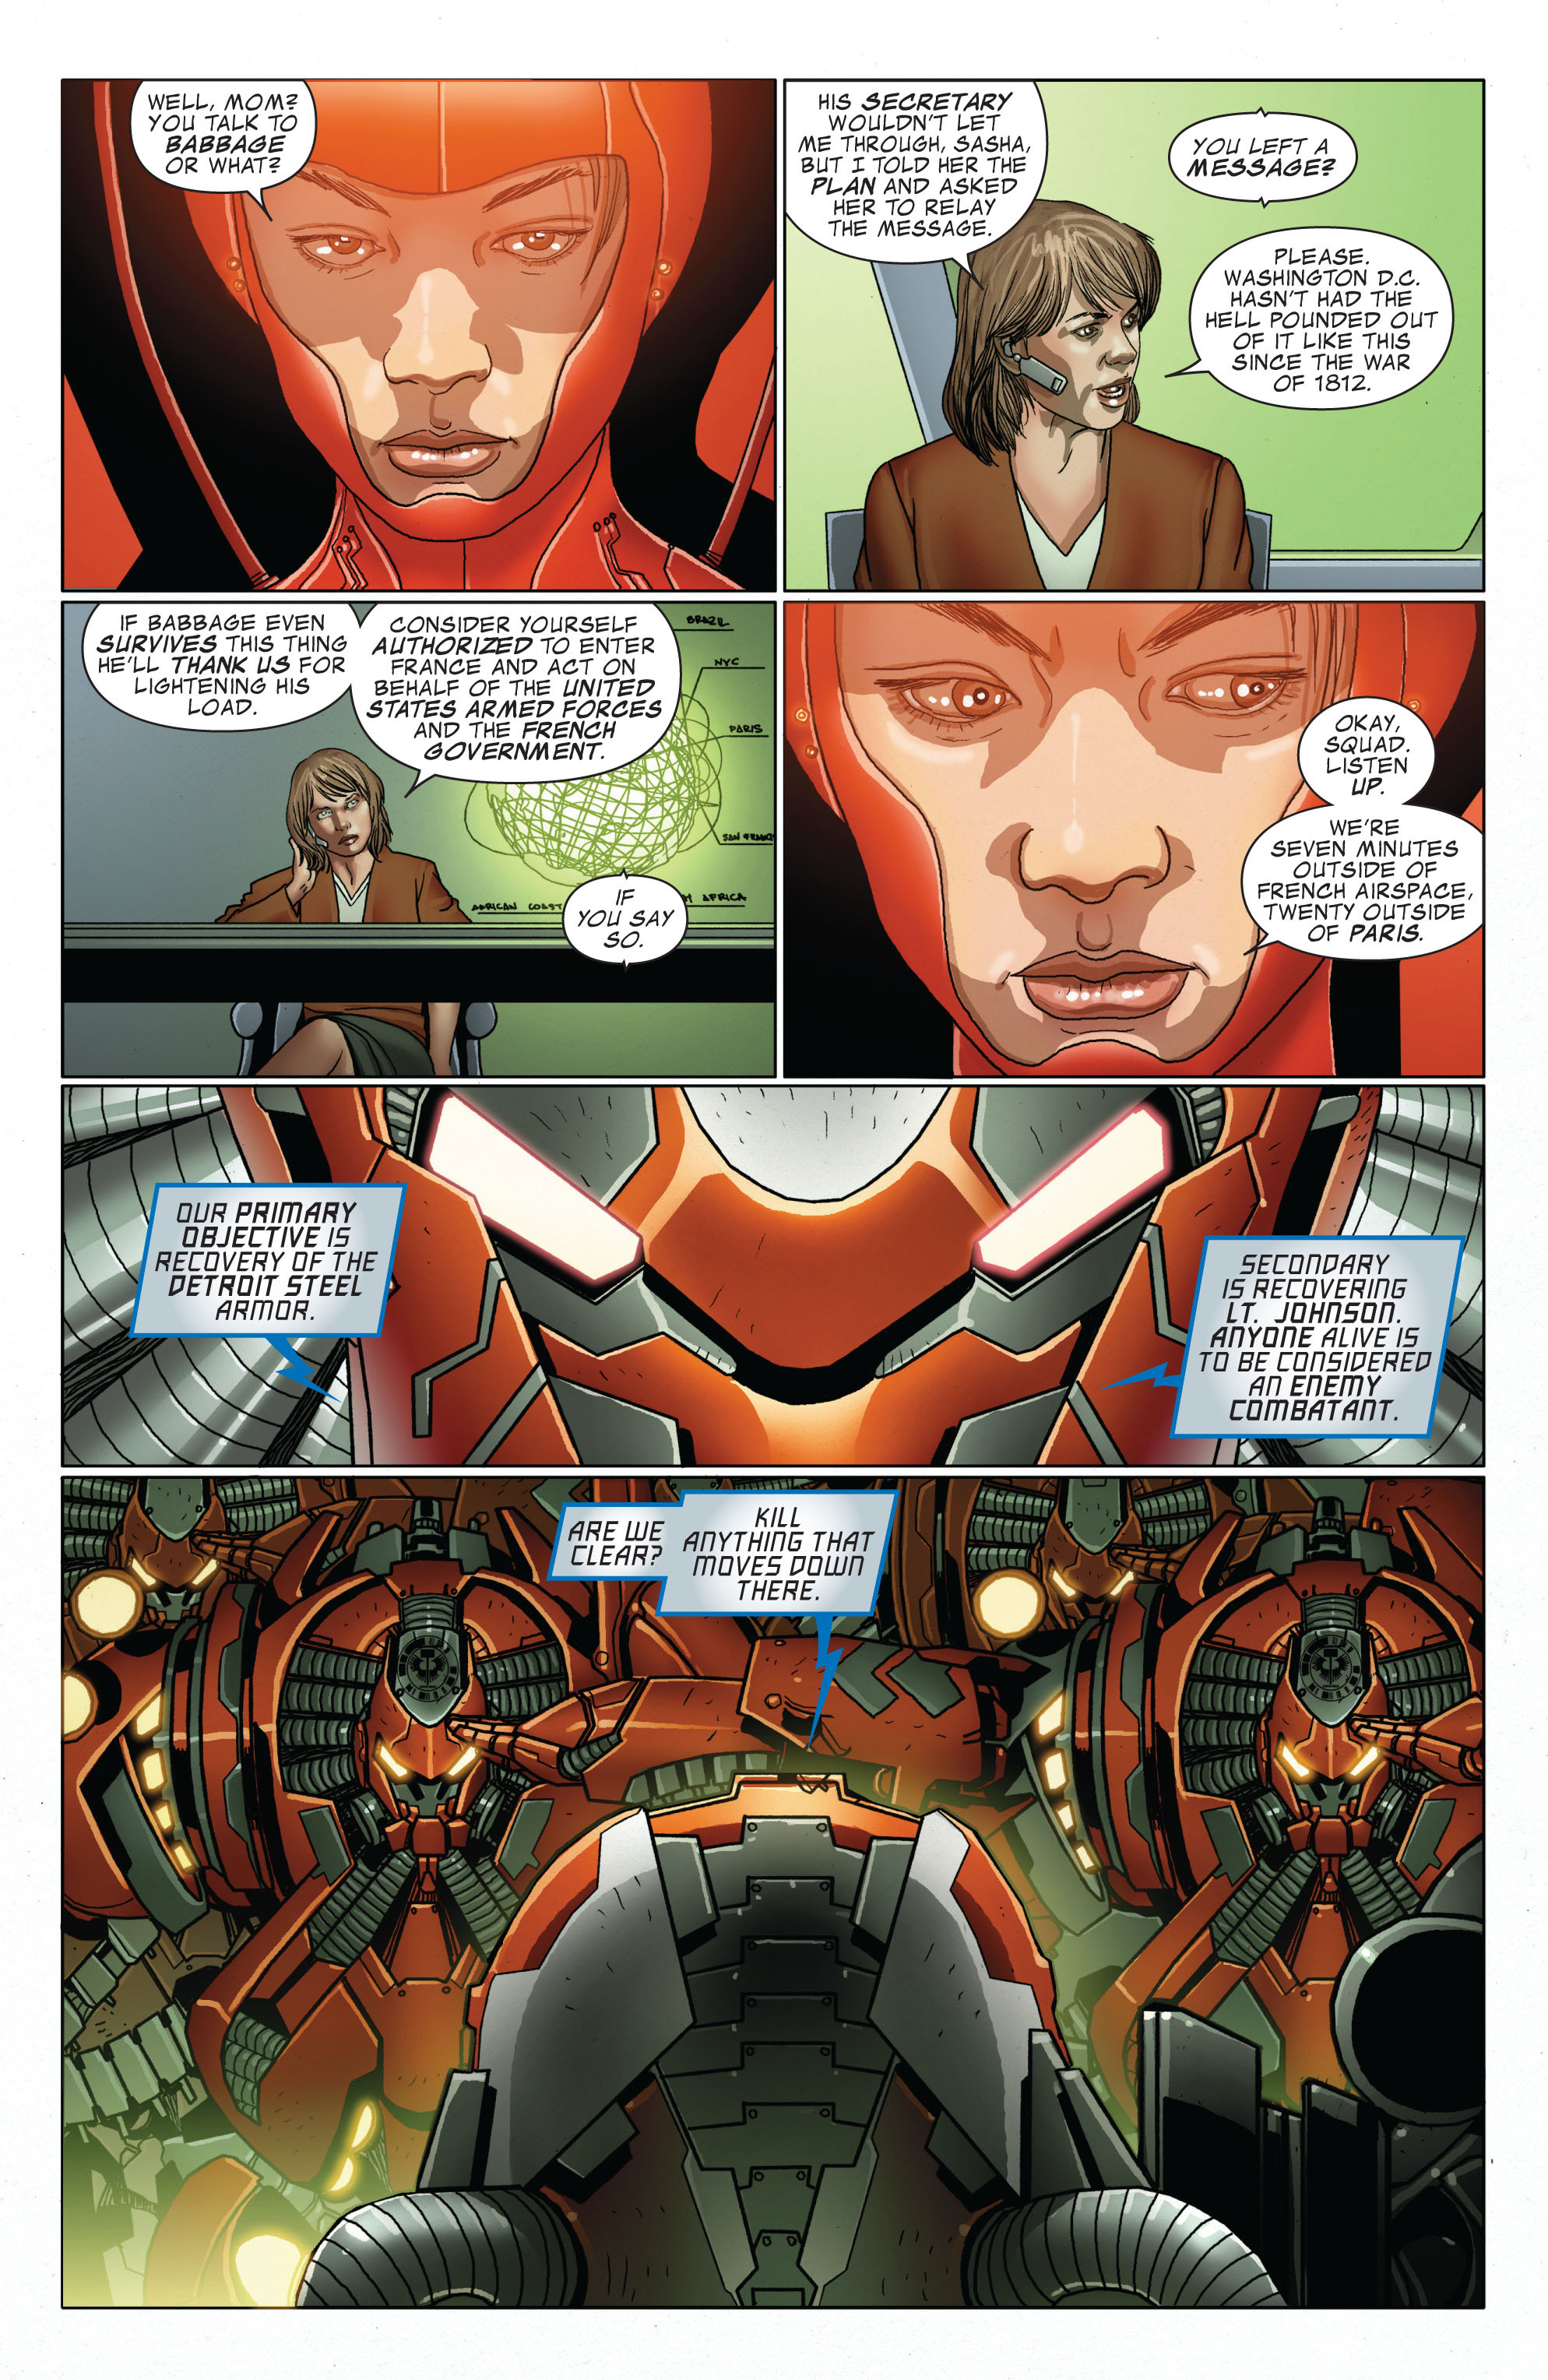 Invincible Iron Man (2008) 506 Page 12